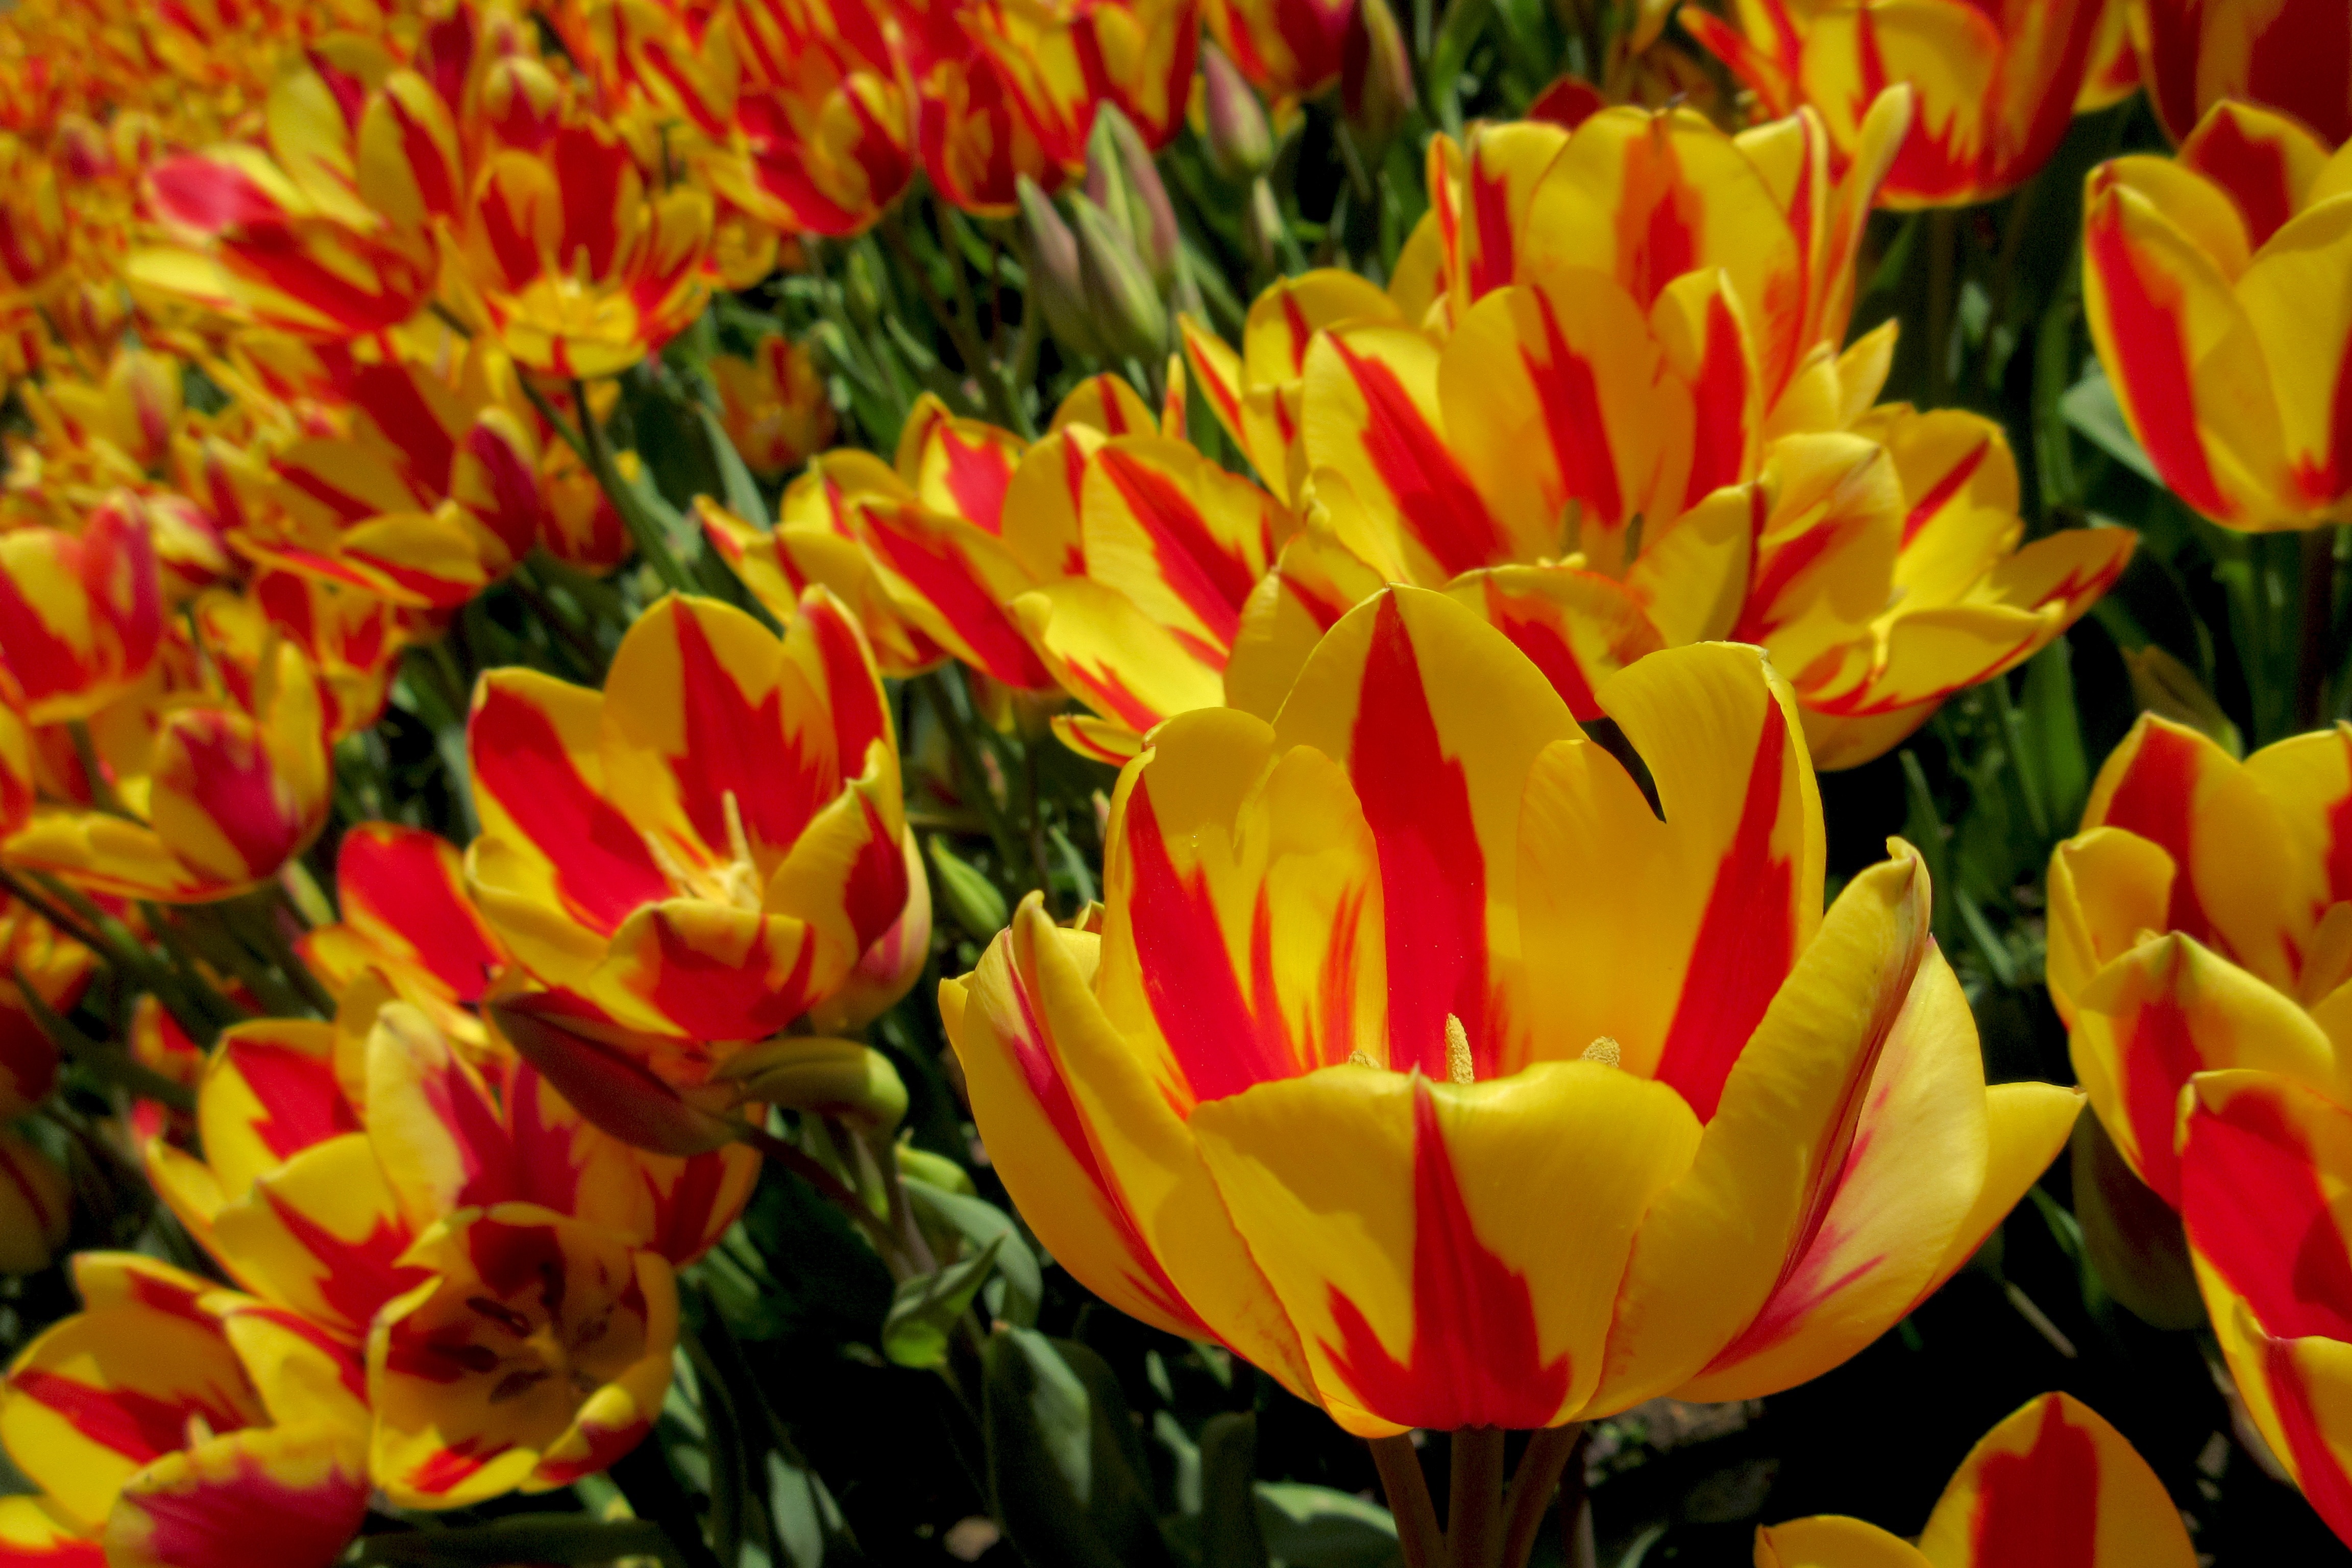 yellow-and-red petaled flowers